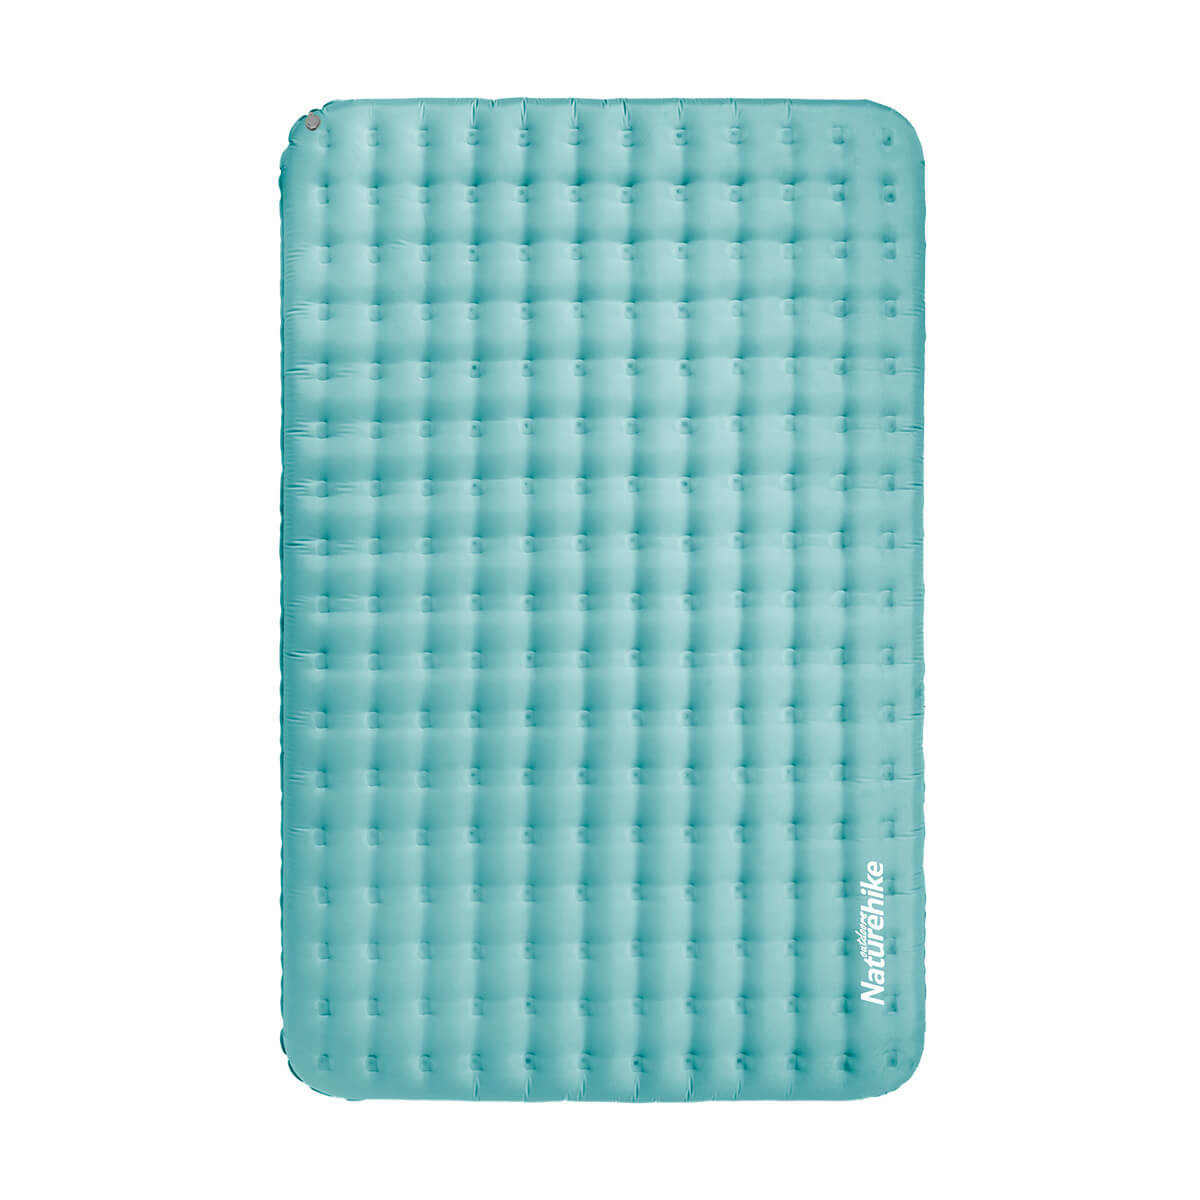 Double-layer TPU inflatable mattress